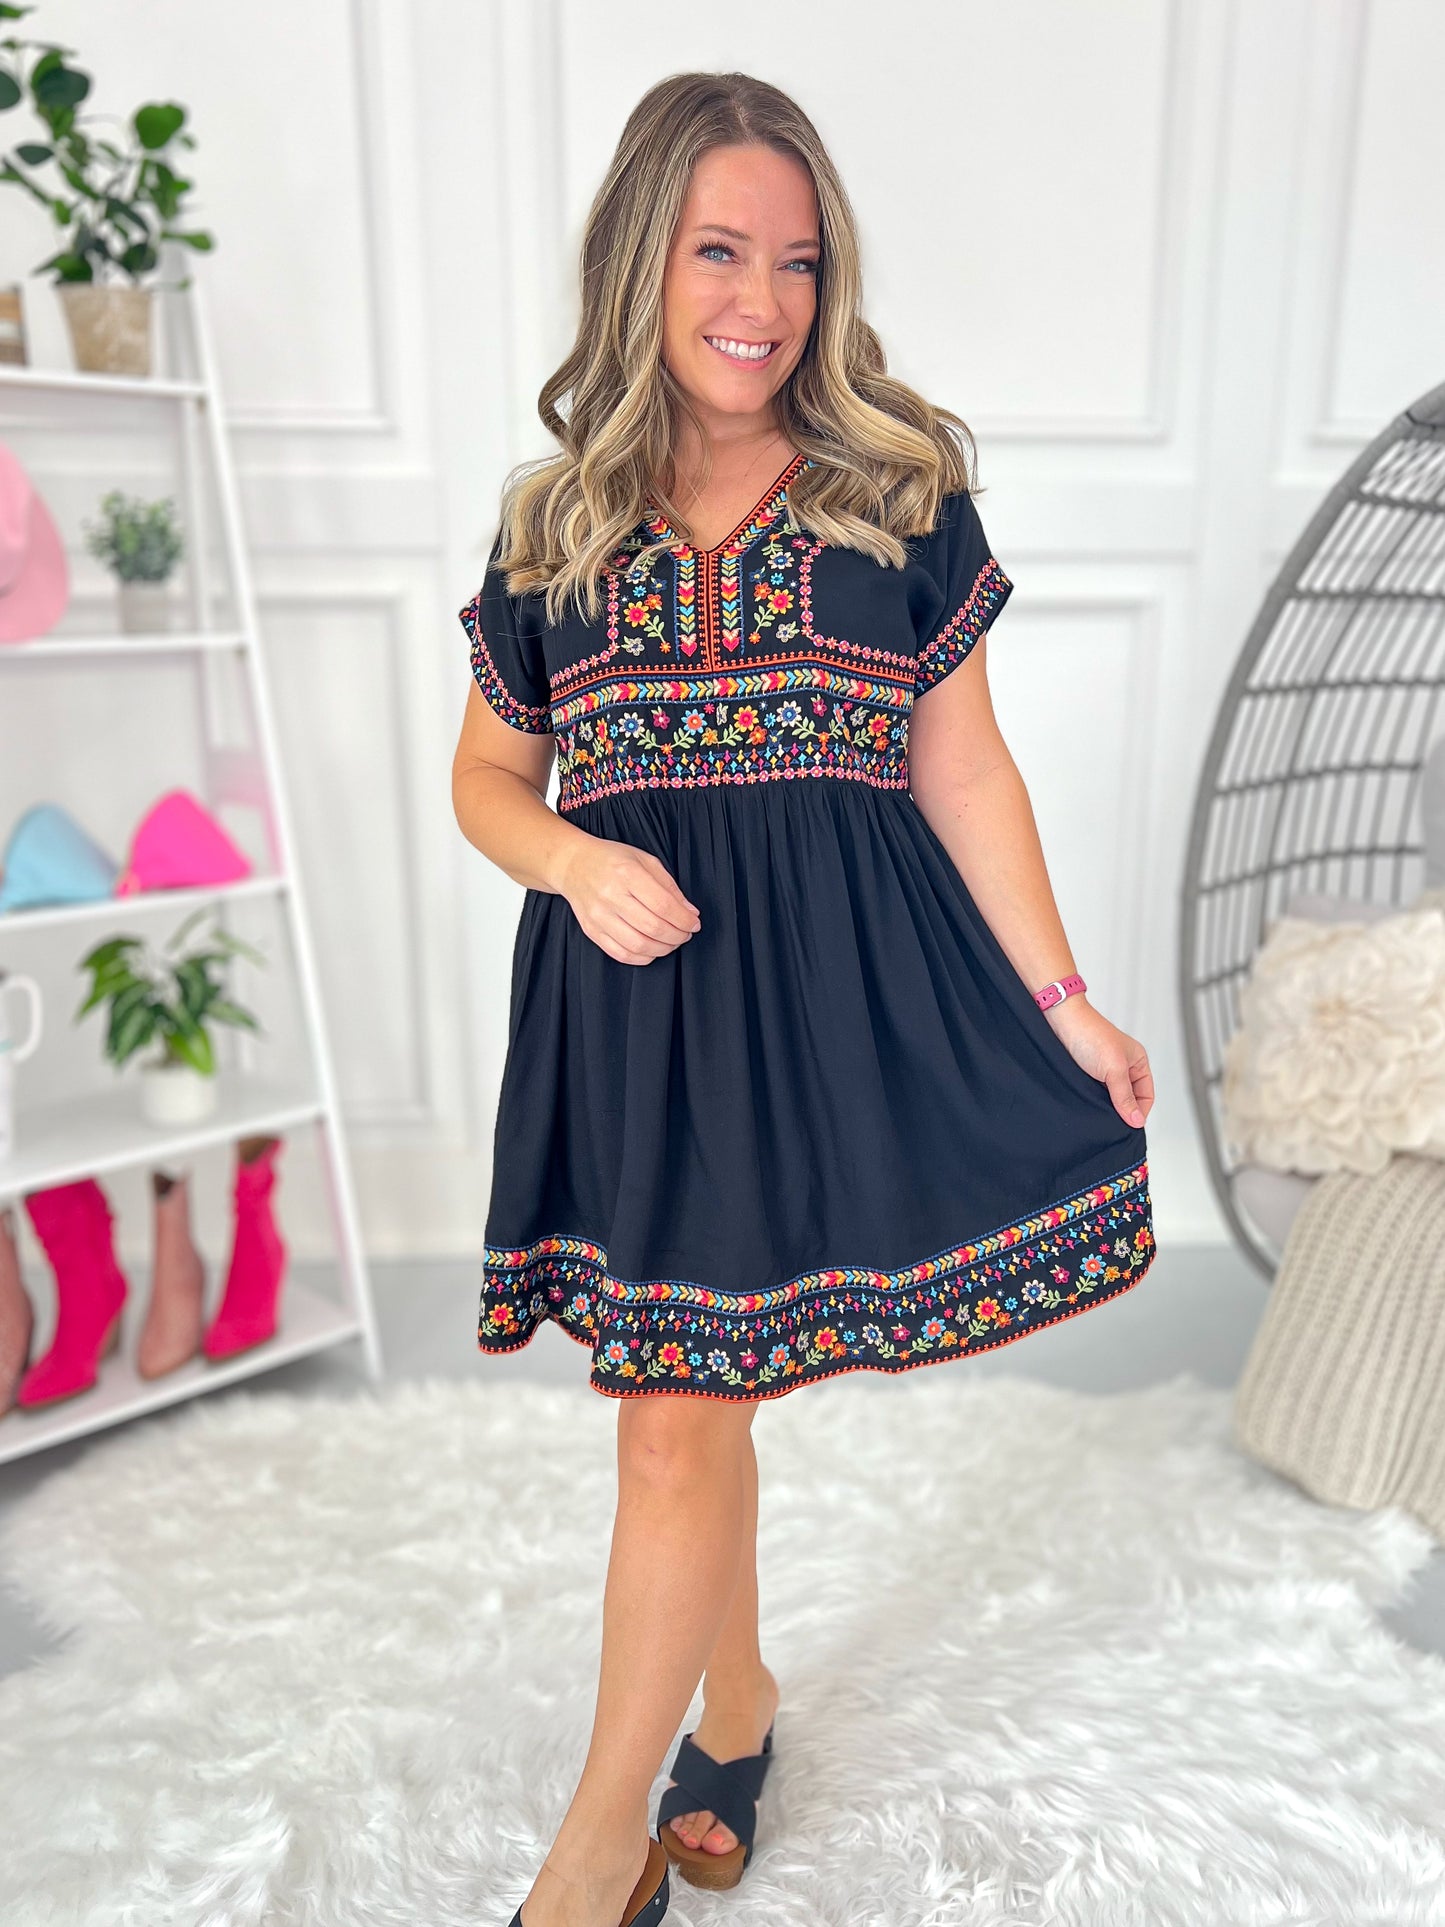 Meet Me in Mexico Embroidered Dress